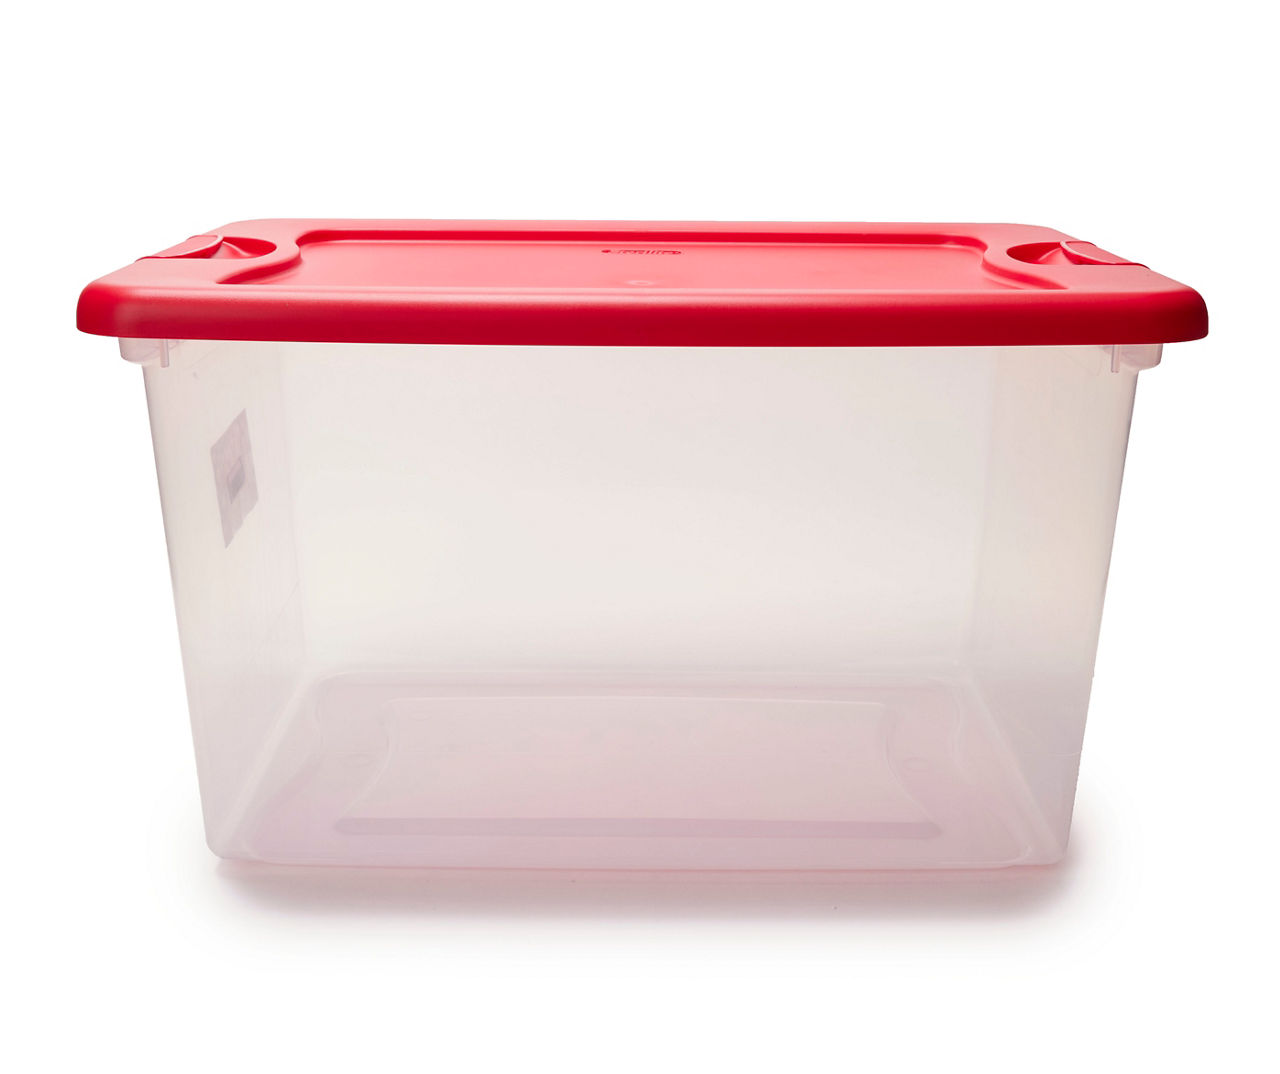 Sterilite Clear 64-Quart Latch Tote with Rocket Red Lid